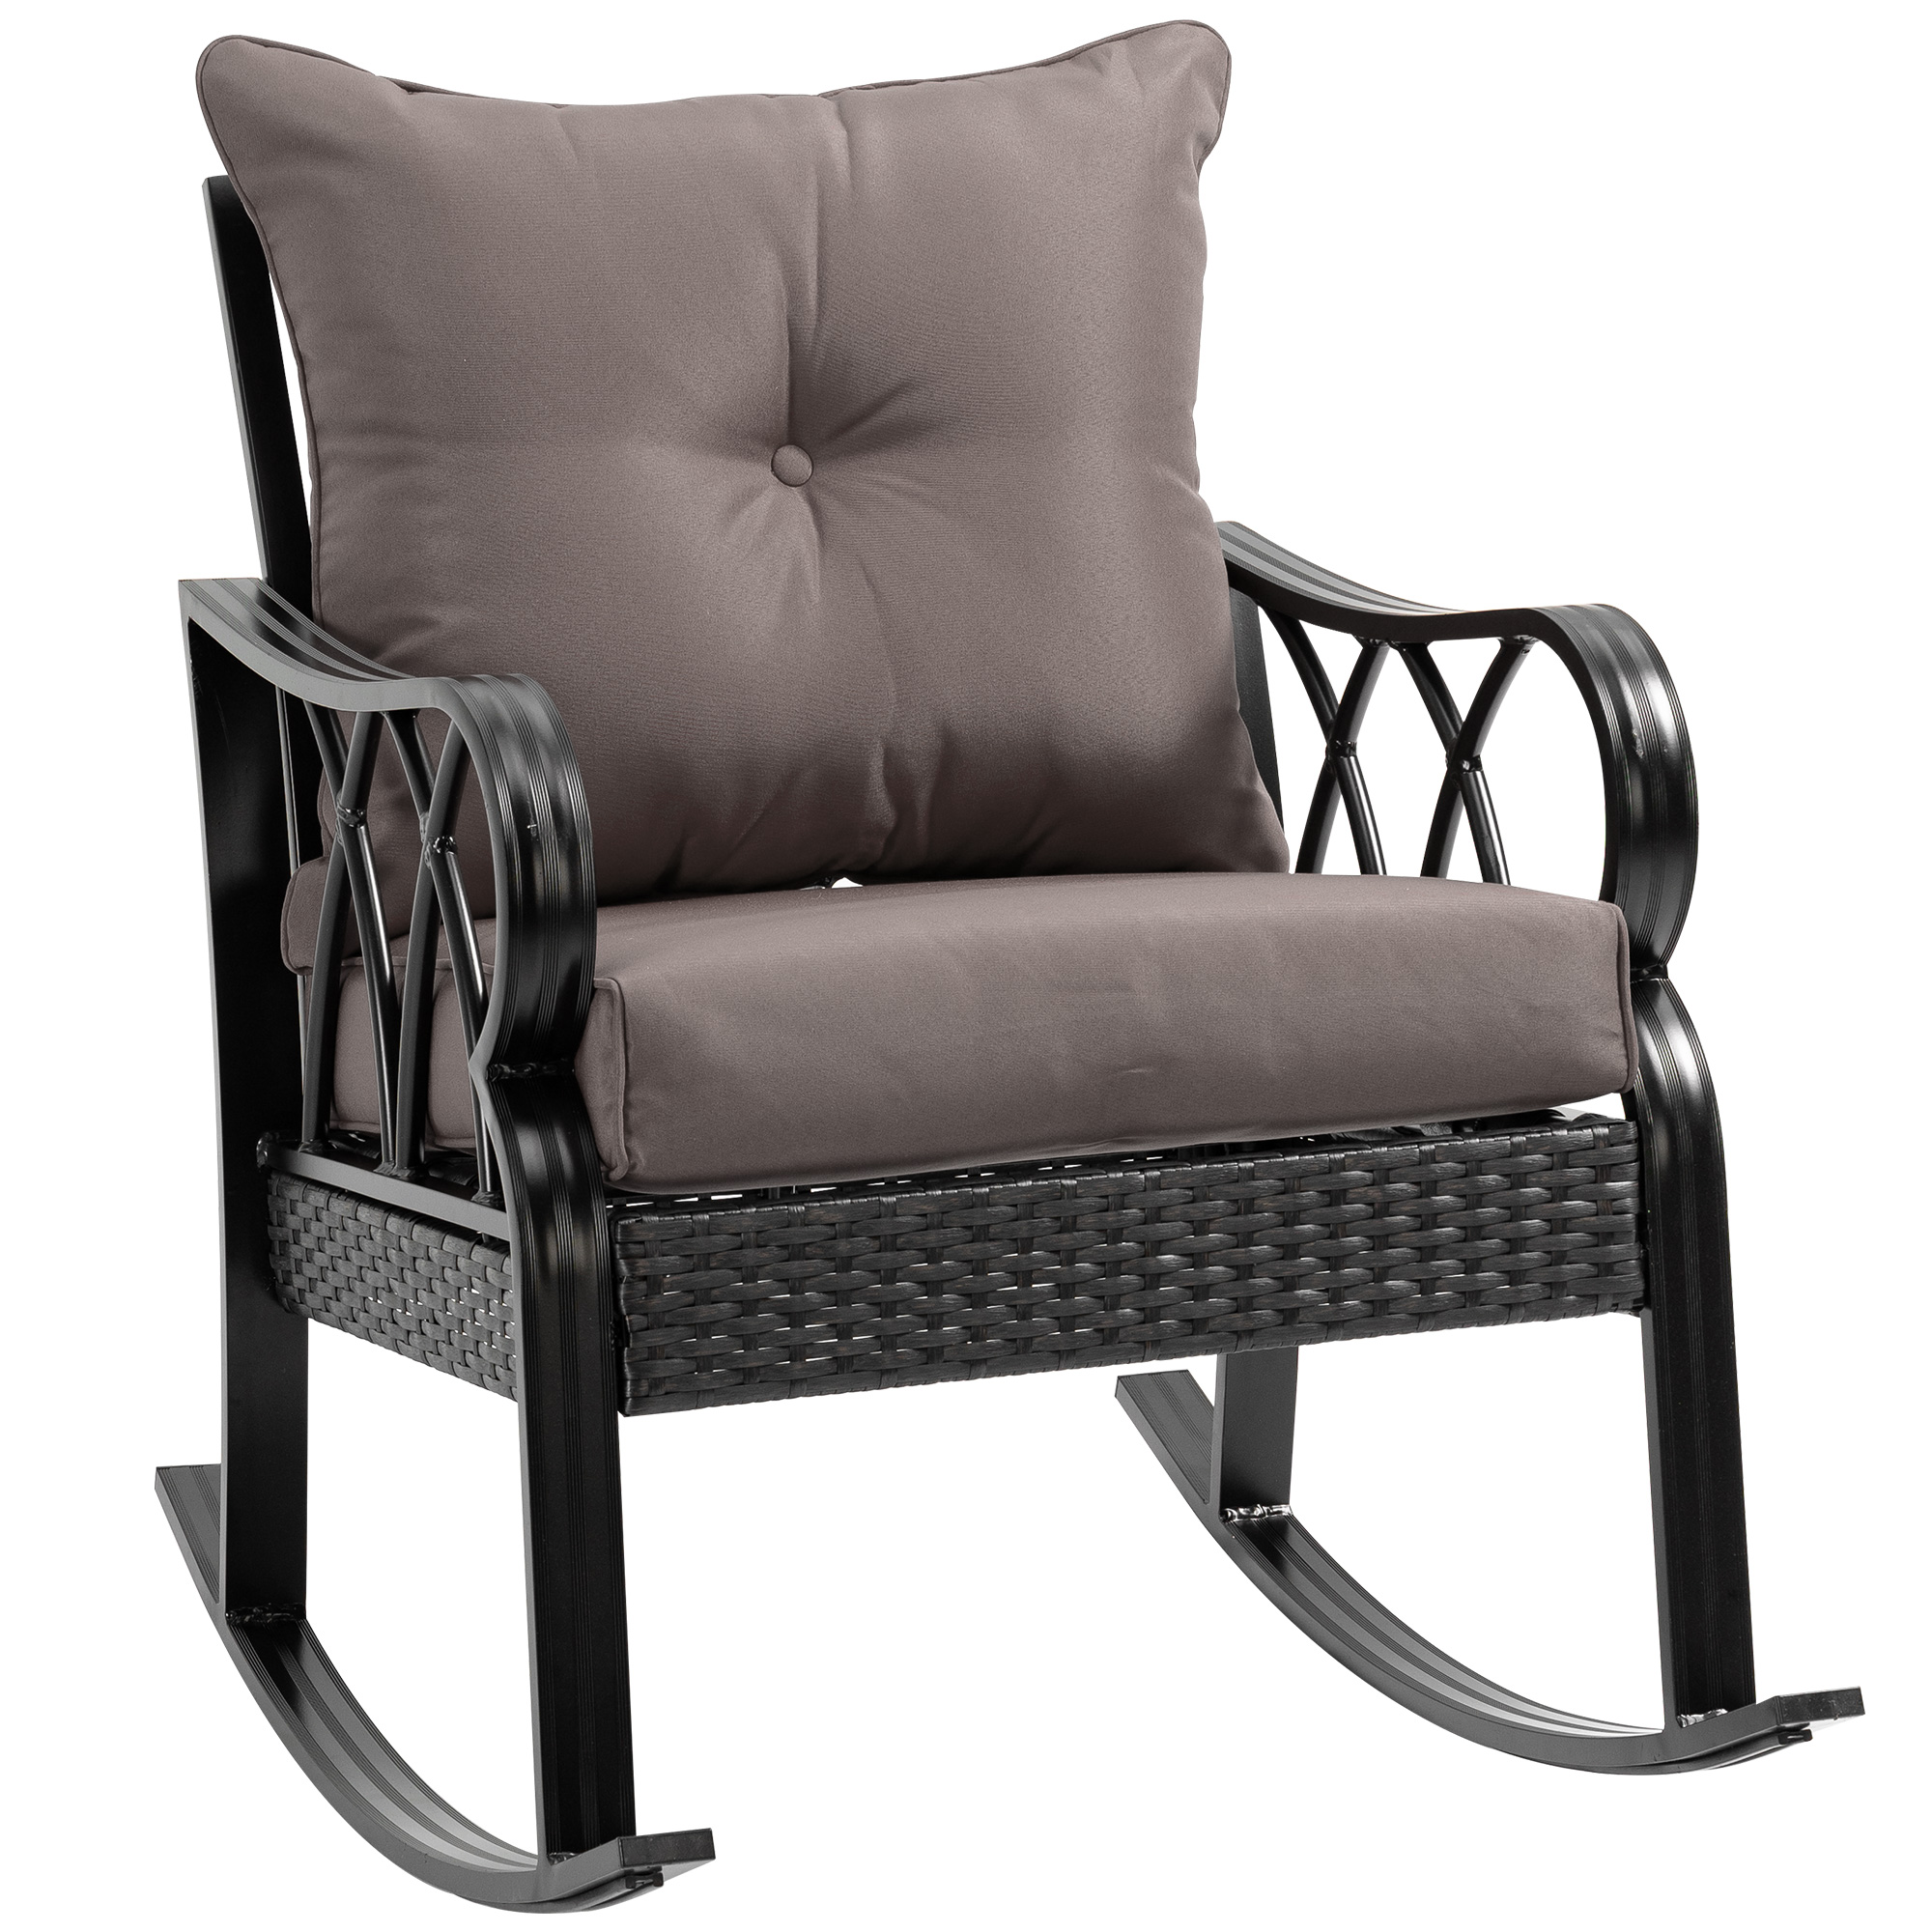 Outsunny Outdoor Wicker Rocking Chair with Padded Cushions, Aluminum Furniture Rattan Porch Rocker Chair w/ Armrest for Garden, Patio, and Backyard, Grey - image 1 of 9